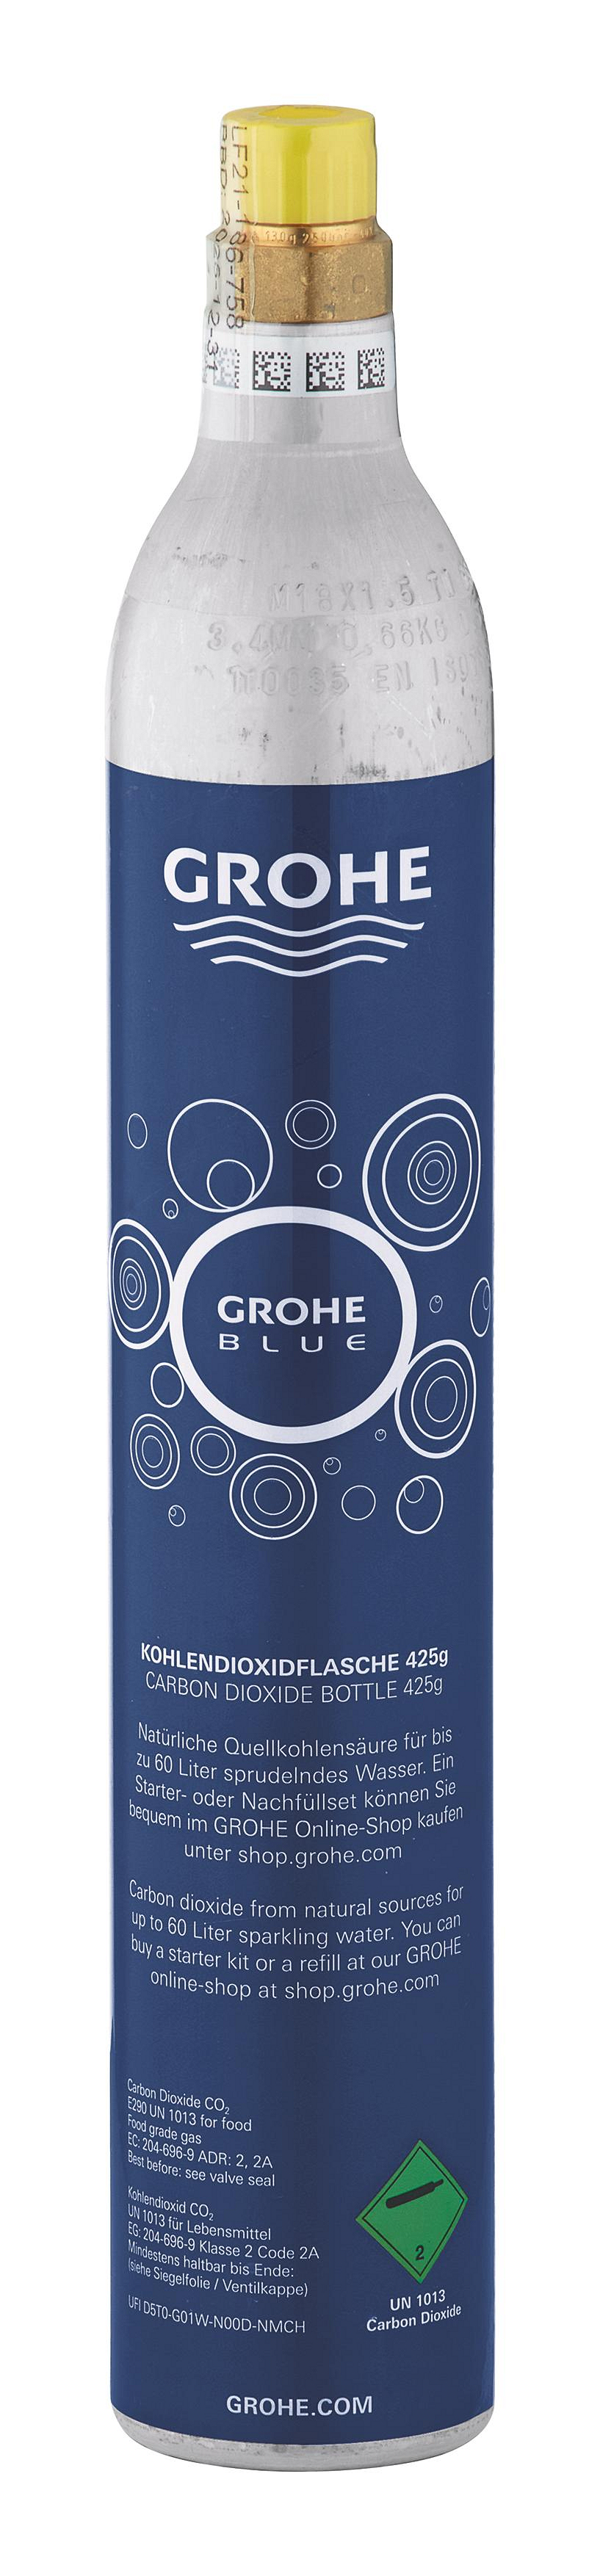 GROHE BLUE CO2 Flasche 425 g Reserve